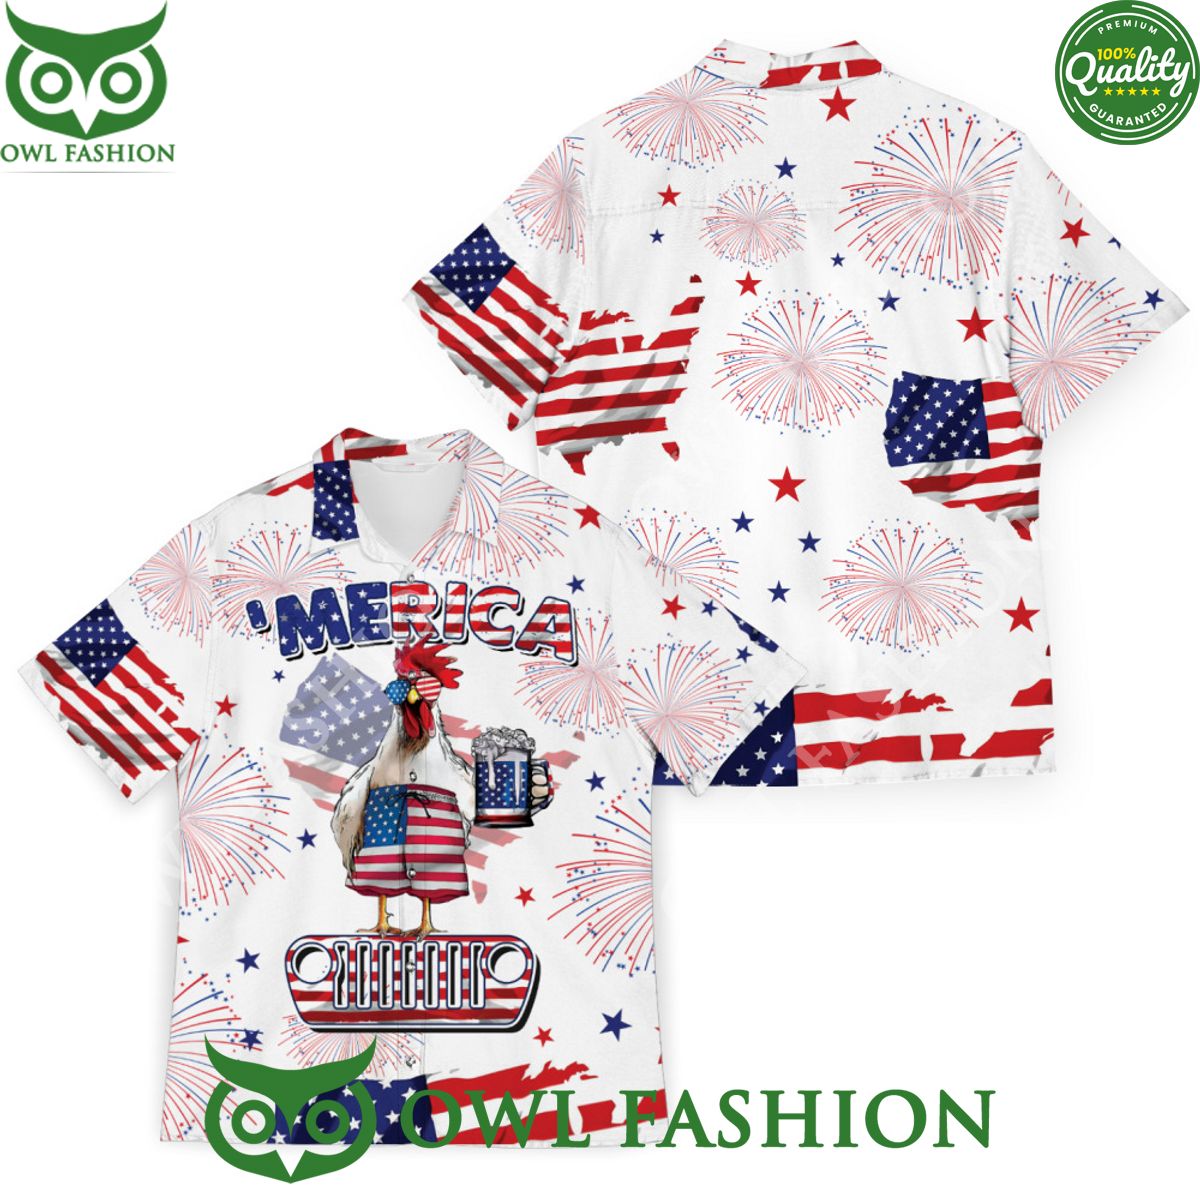 merica chicken 4th of july independence day limited hawaiian shirt 1 gjvVE.jpg